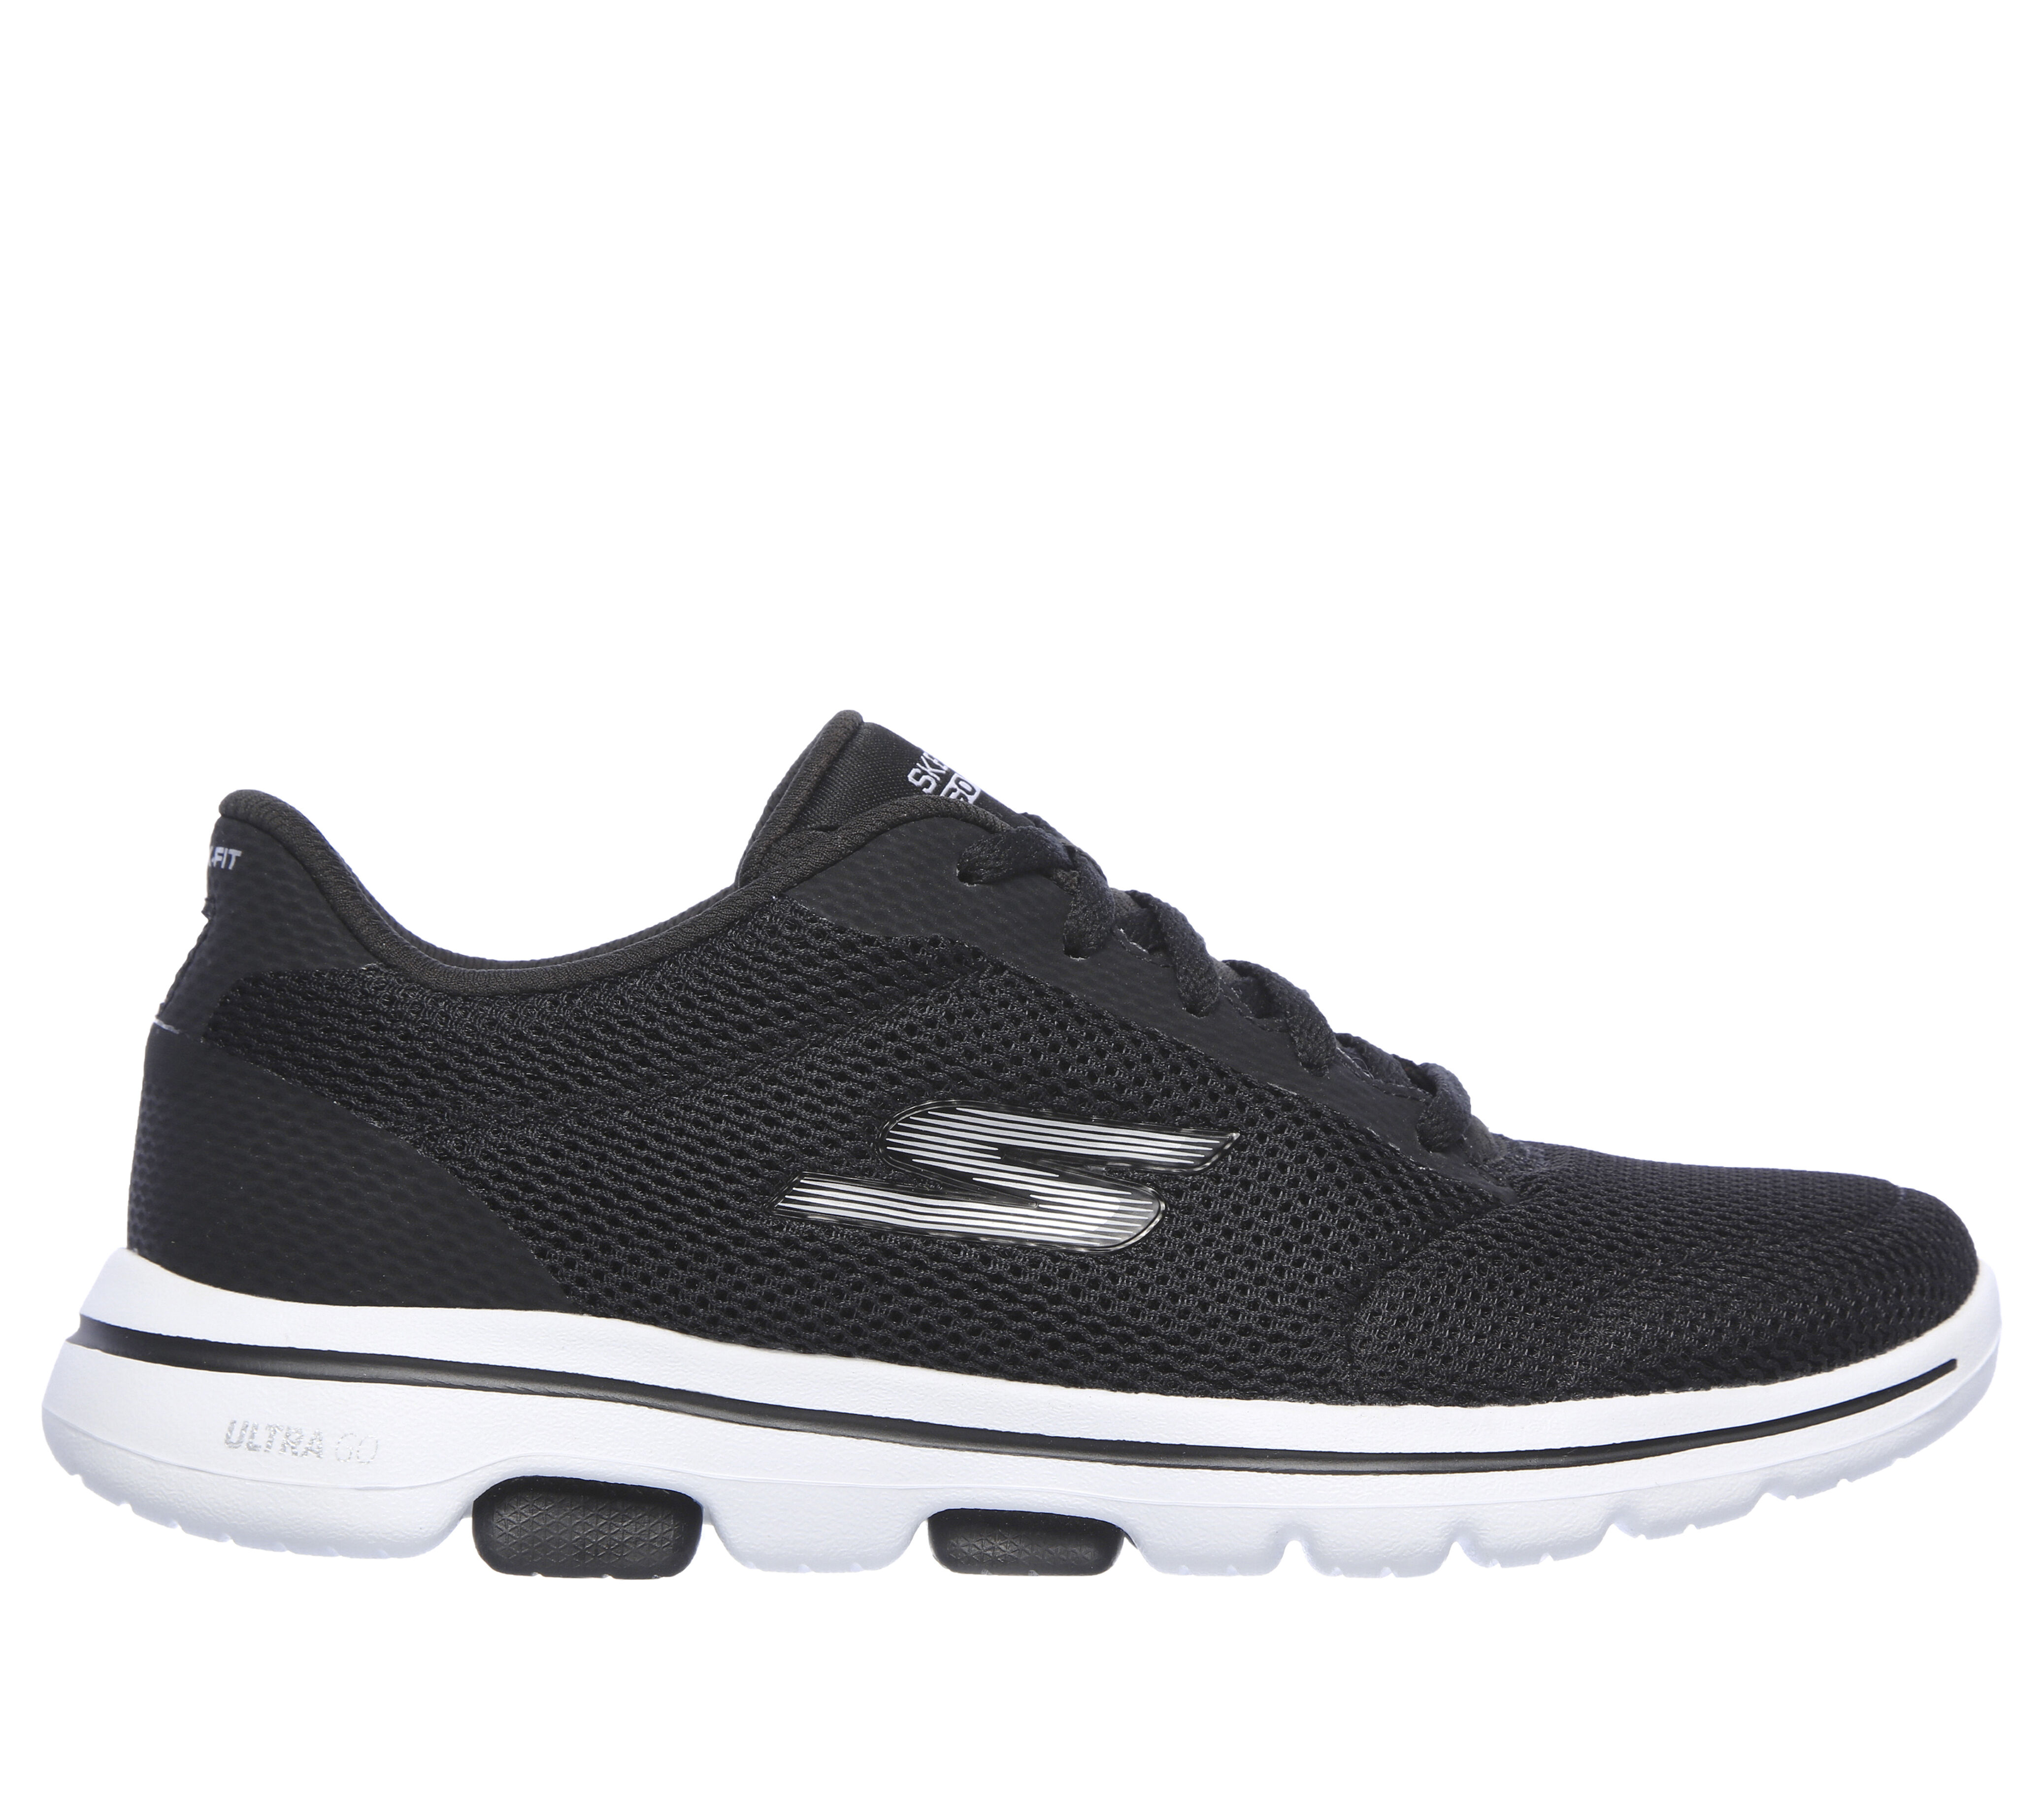 skechers shoes clearance sale